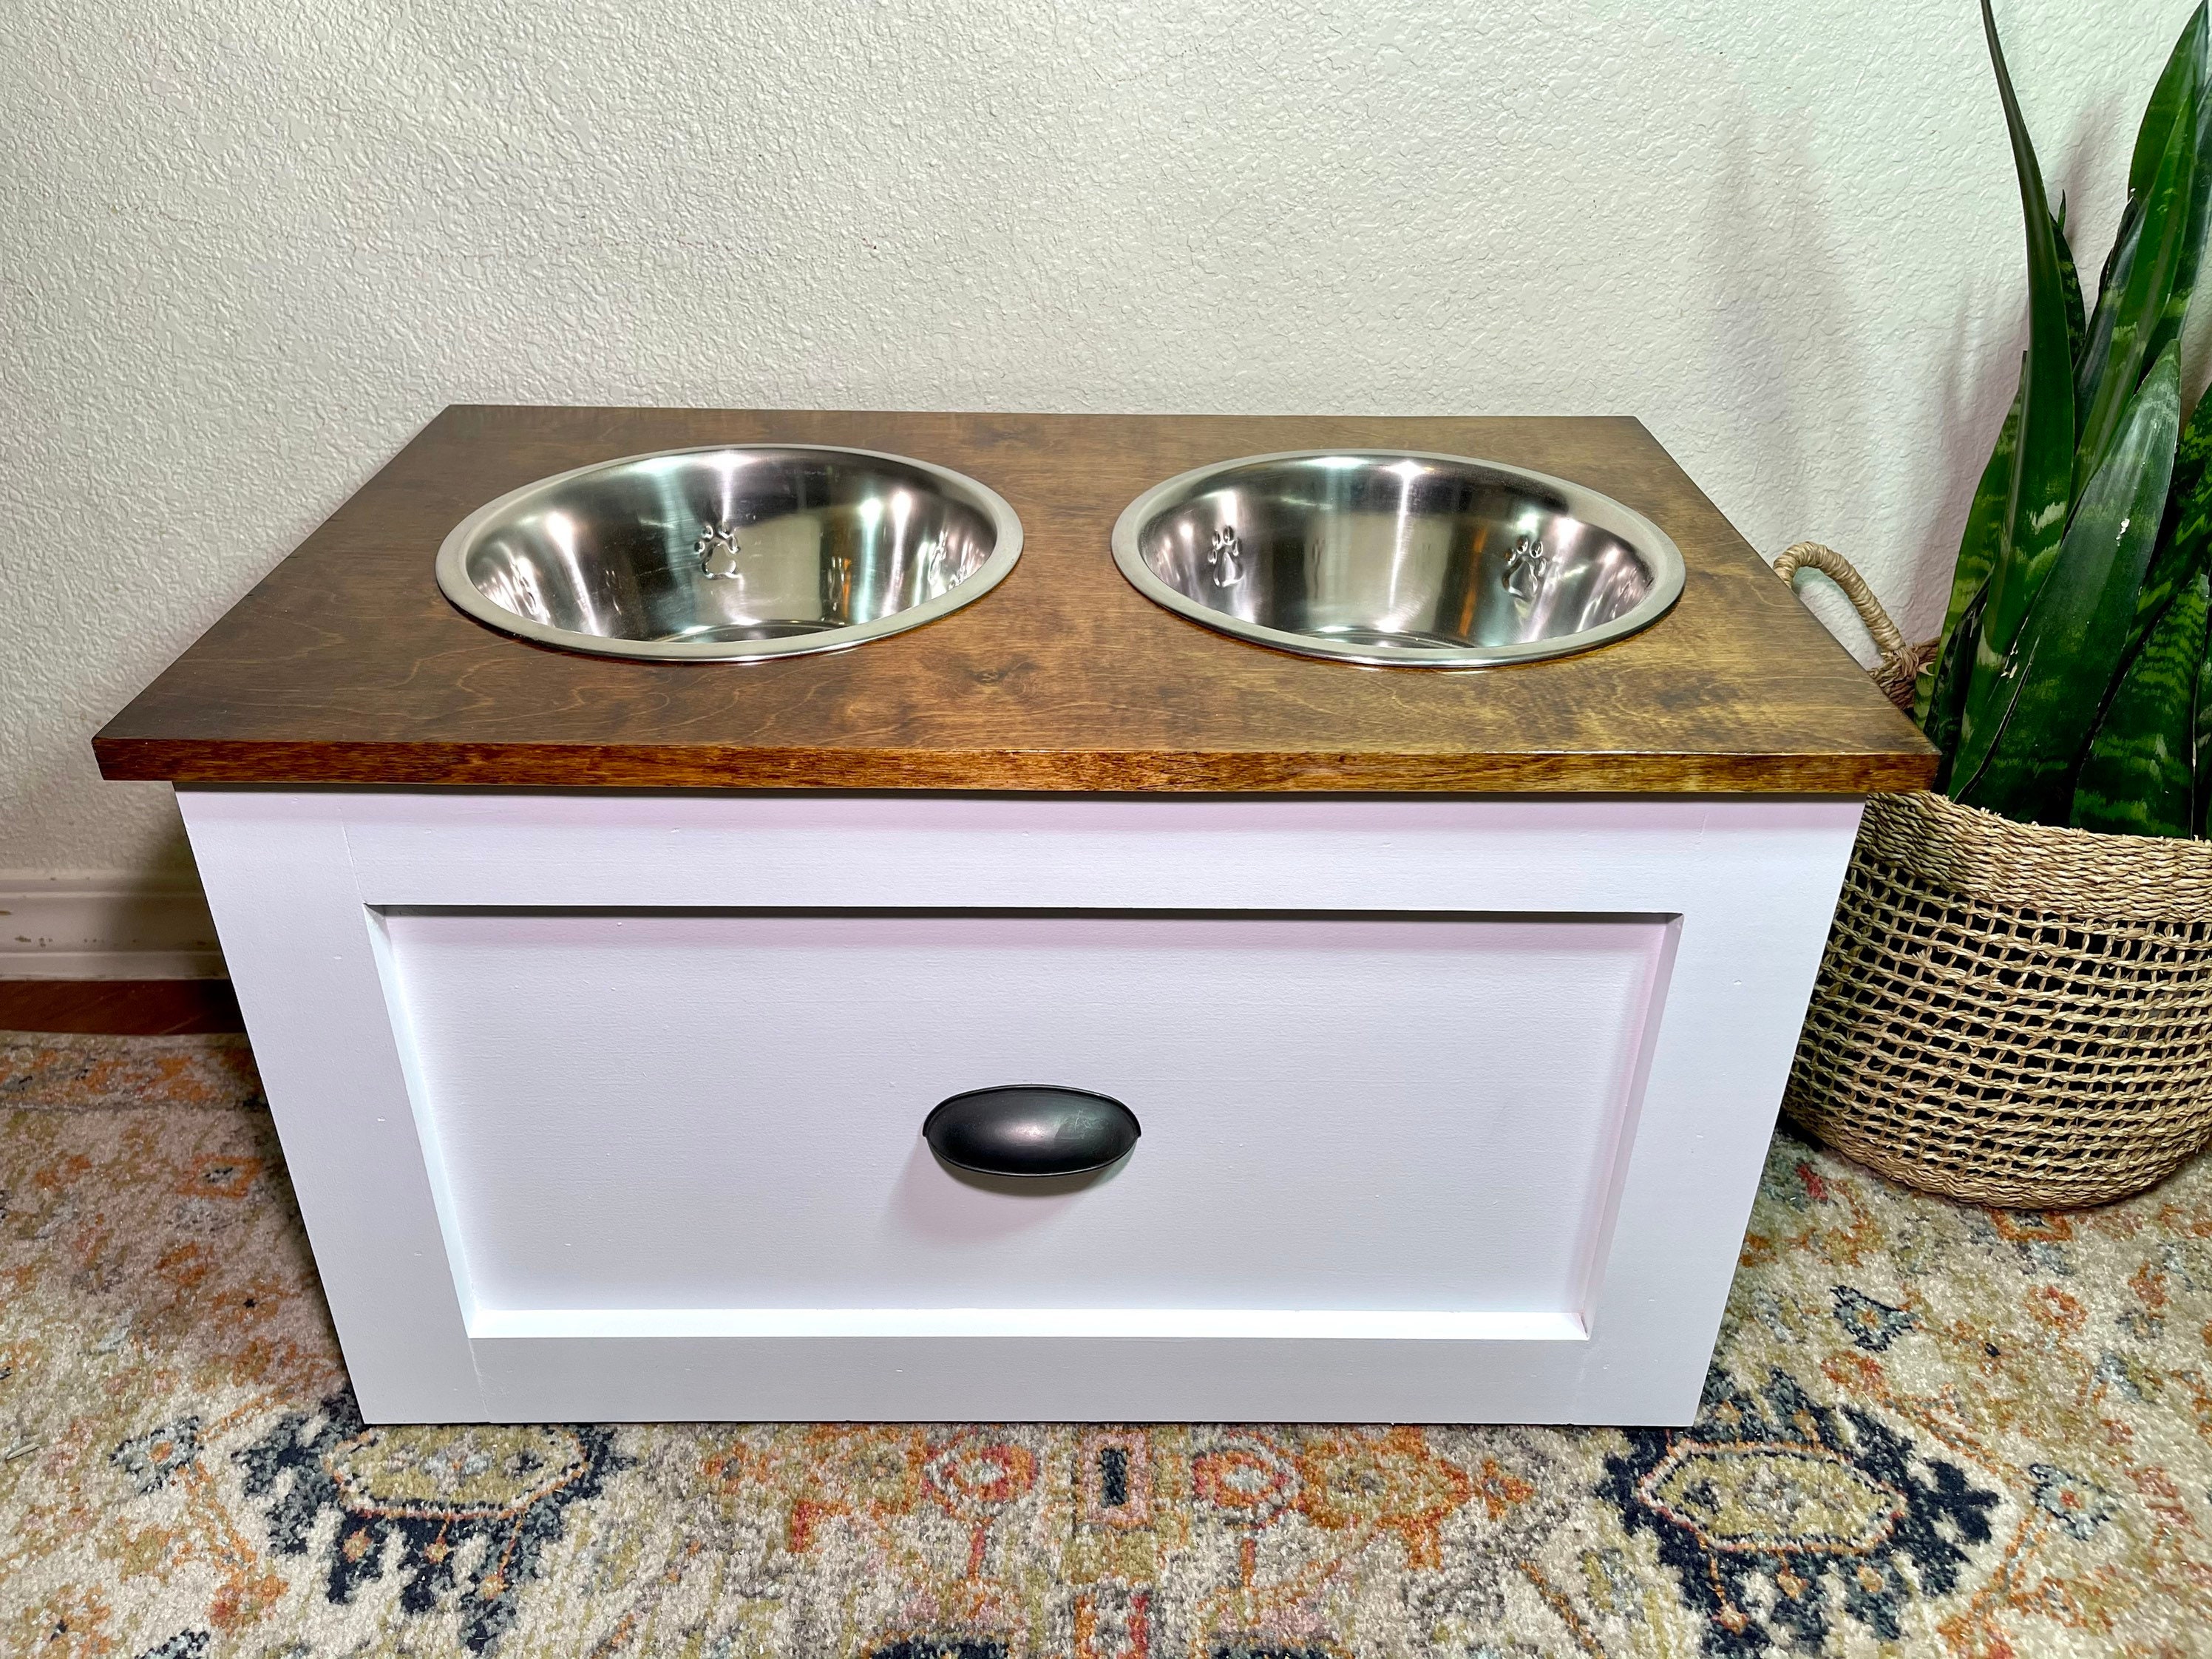 Large Pet Feeder Station Dog Food Storage Cabinet Stainless Double Pull Out Raised Dog Bowls Feeding Watering Supplies